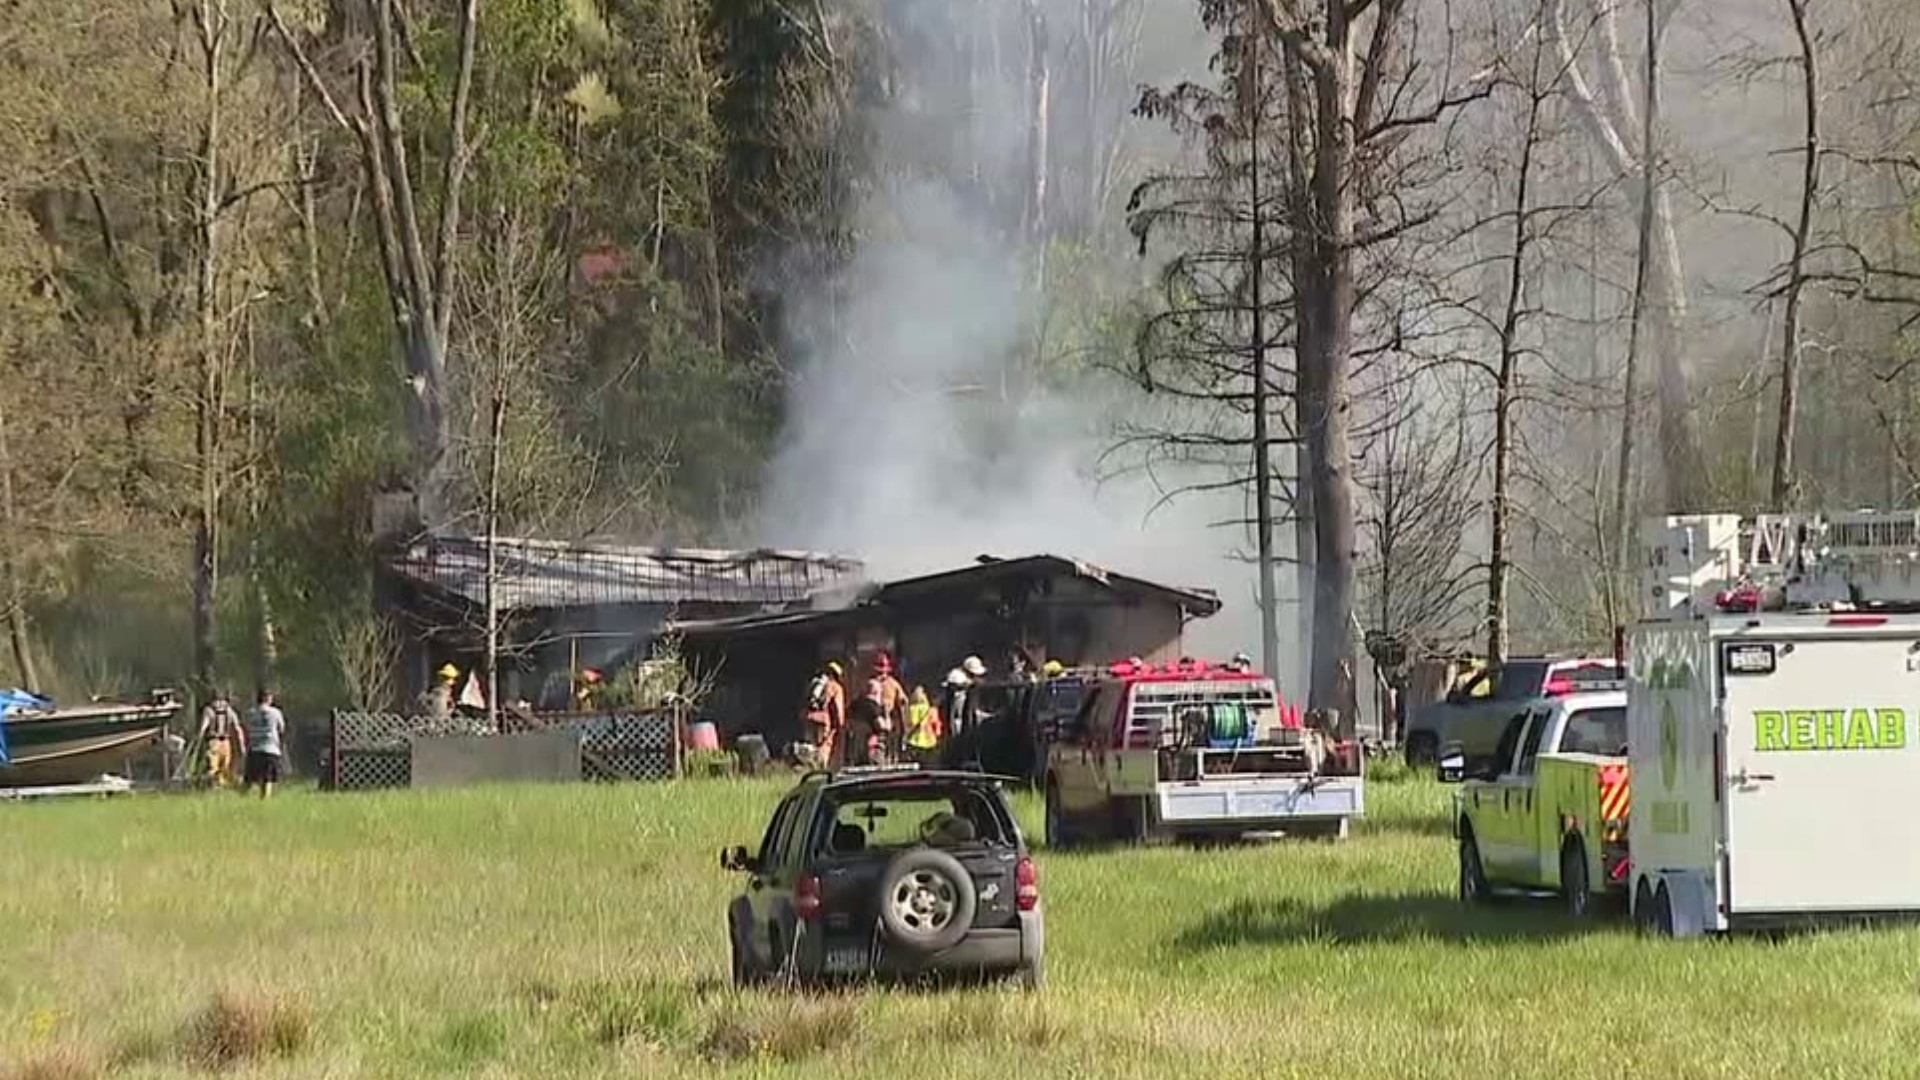 Flames broke out at the home near Danville around 4 p.m.